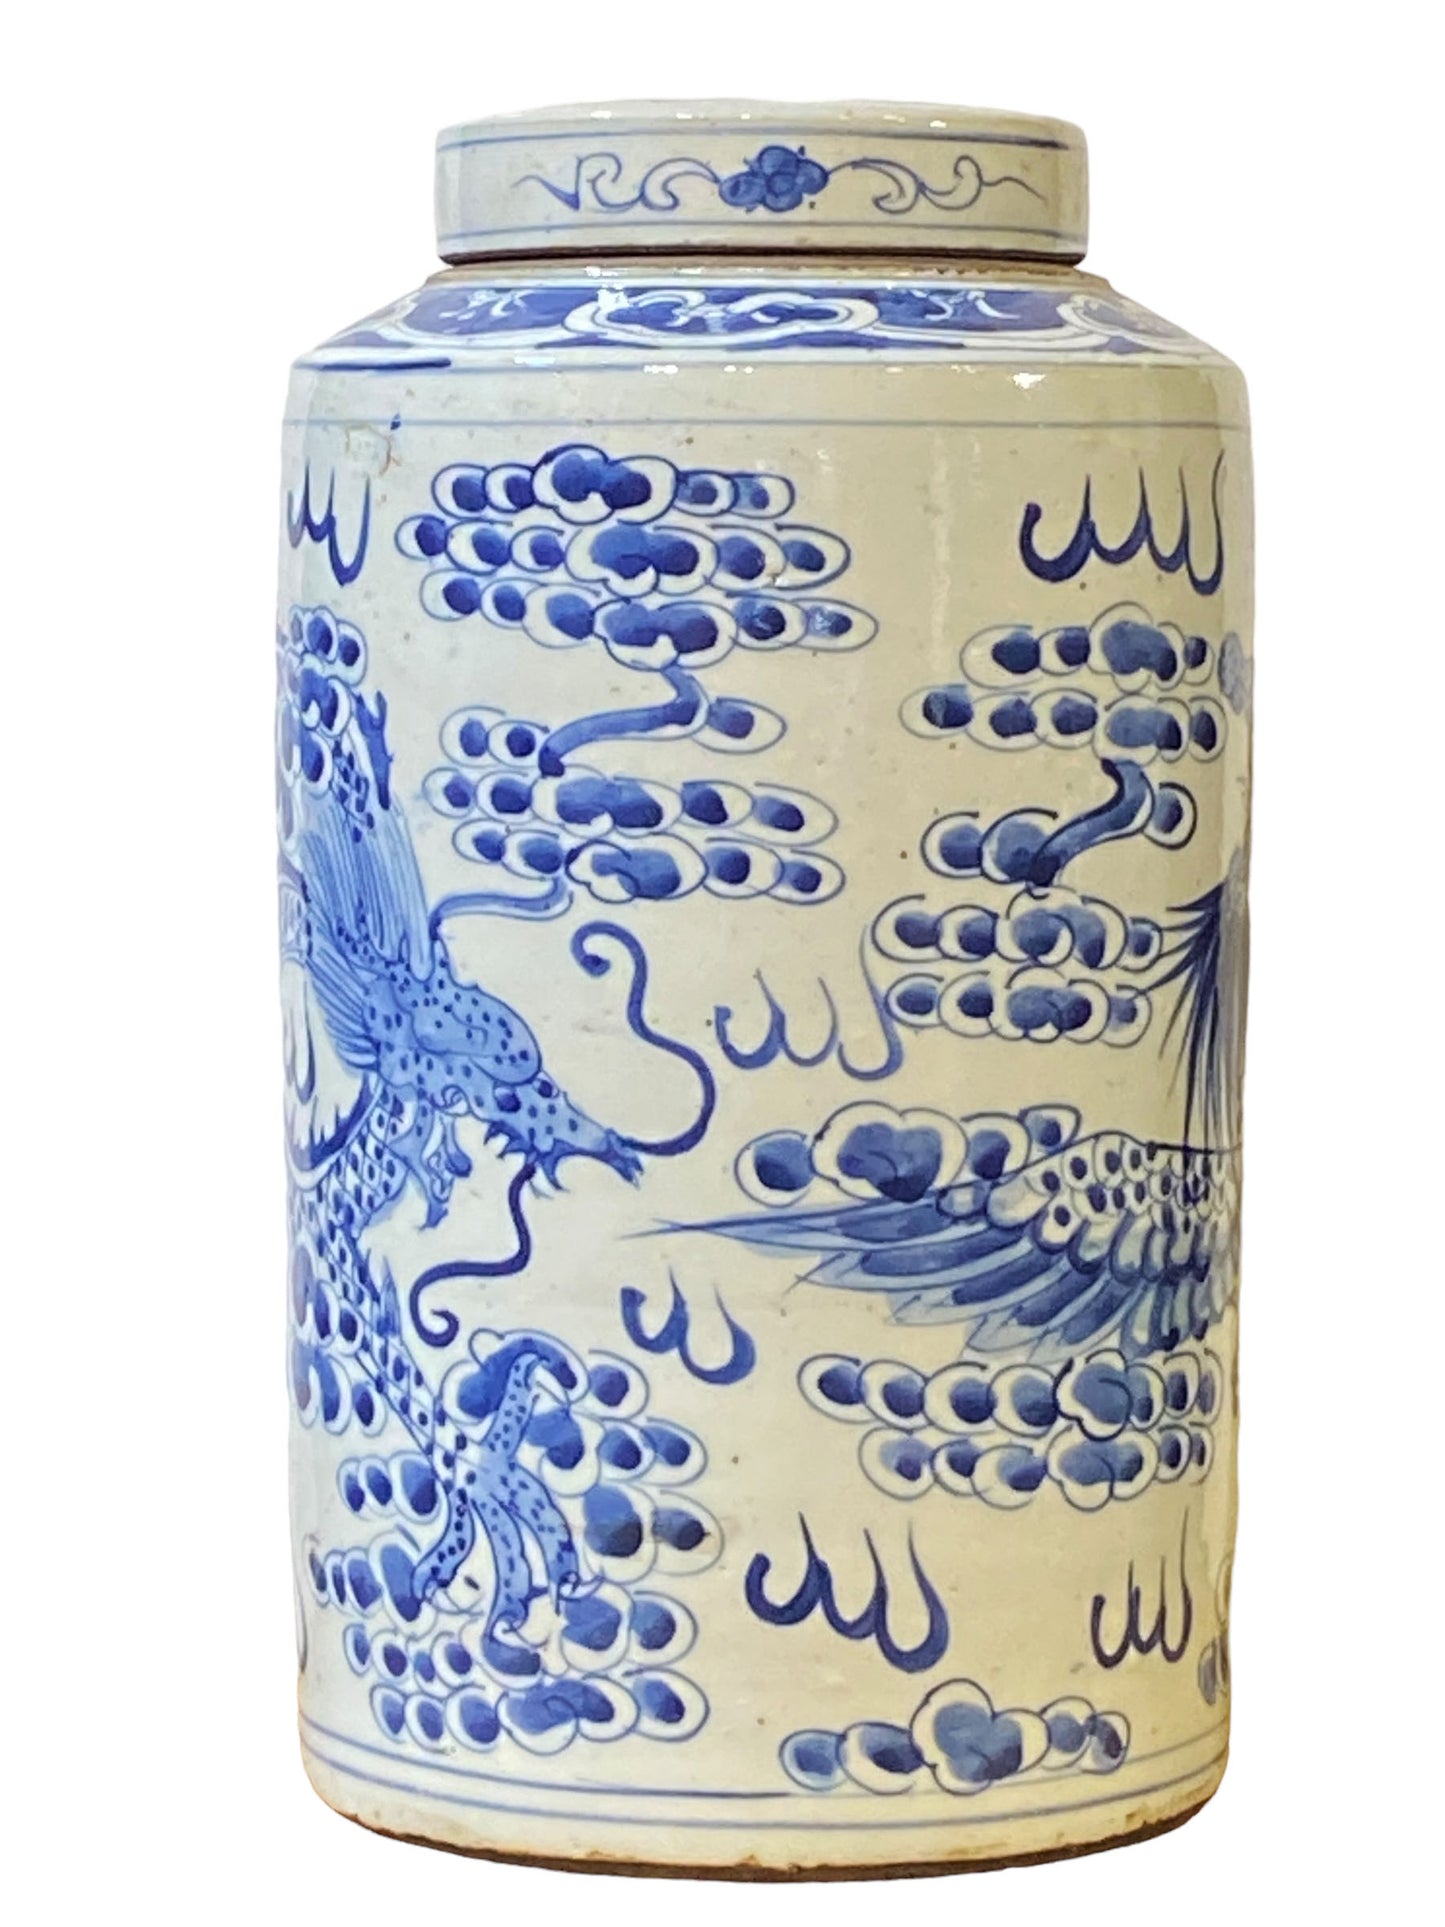 #3686 Chinoiserie Porcelain Blue and White Covered Dragon and Phoenix Ginger Jar 17"H